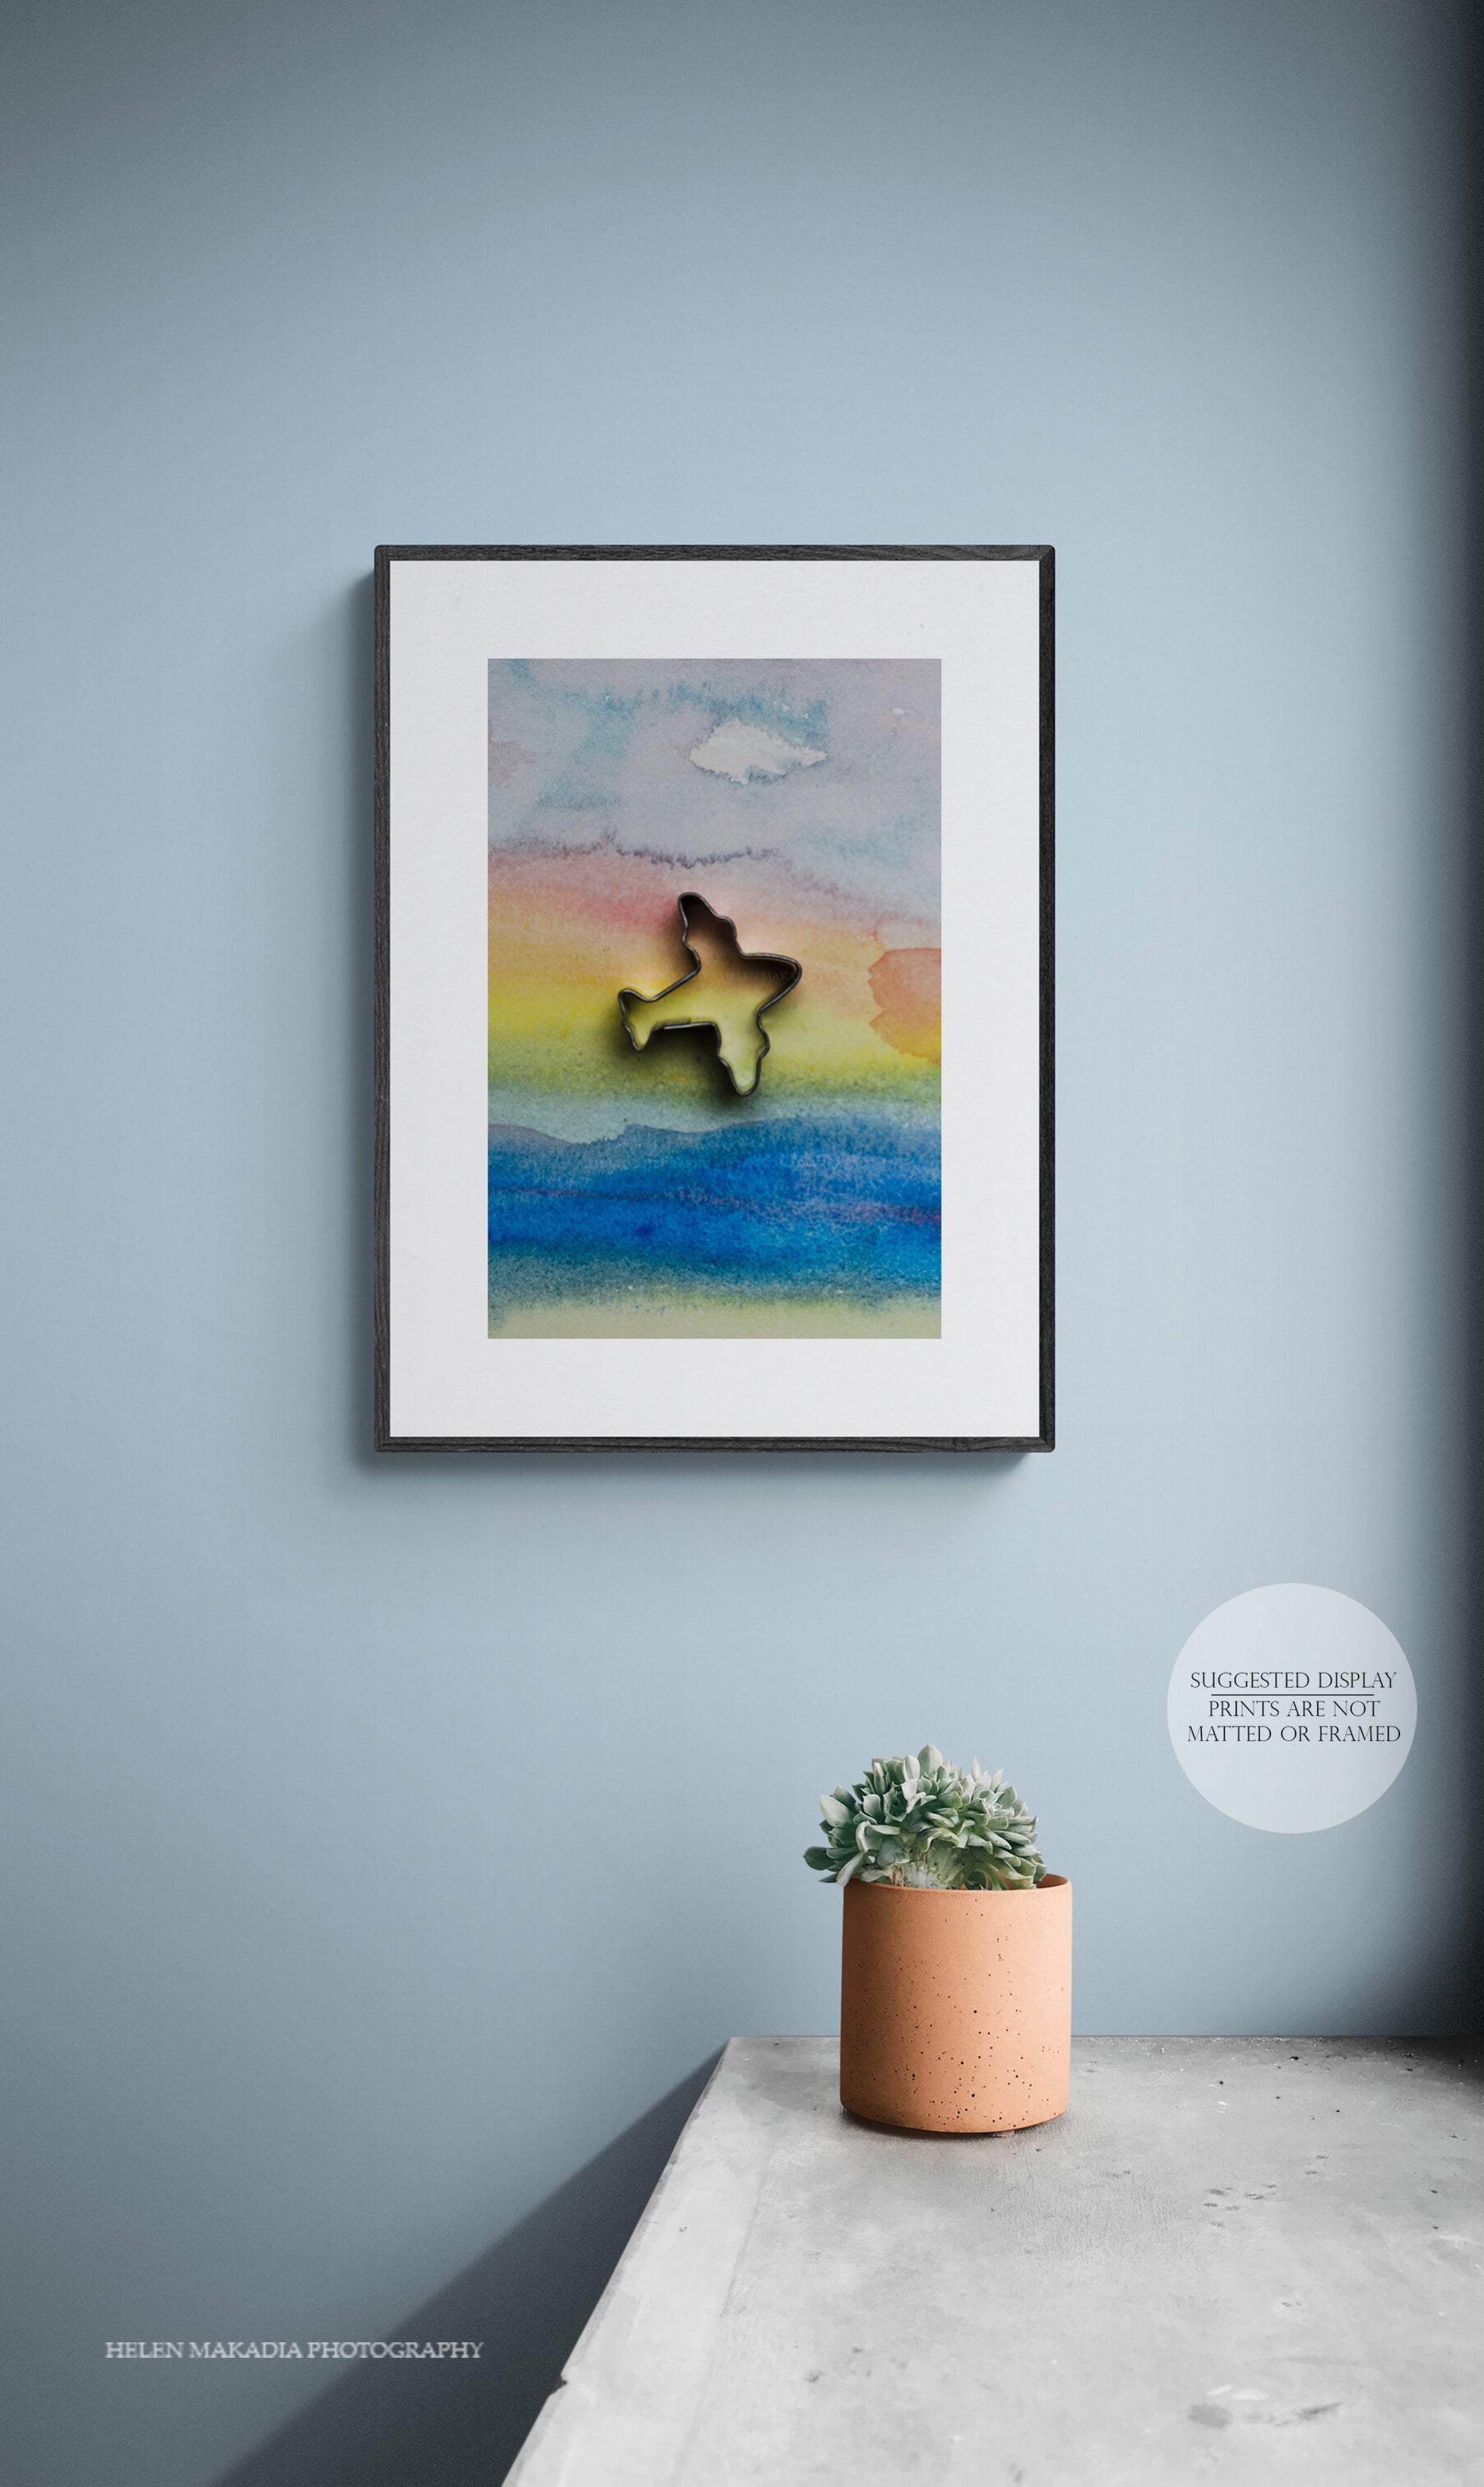 Rainbow and Plane Whimsical Photograph in an EntryWay as Wall Art